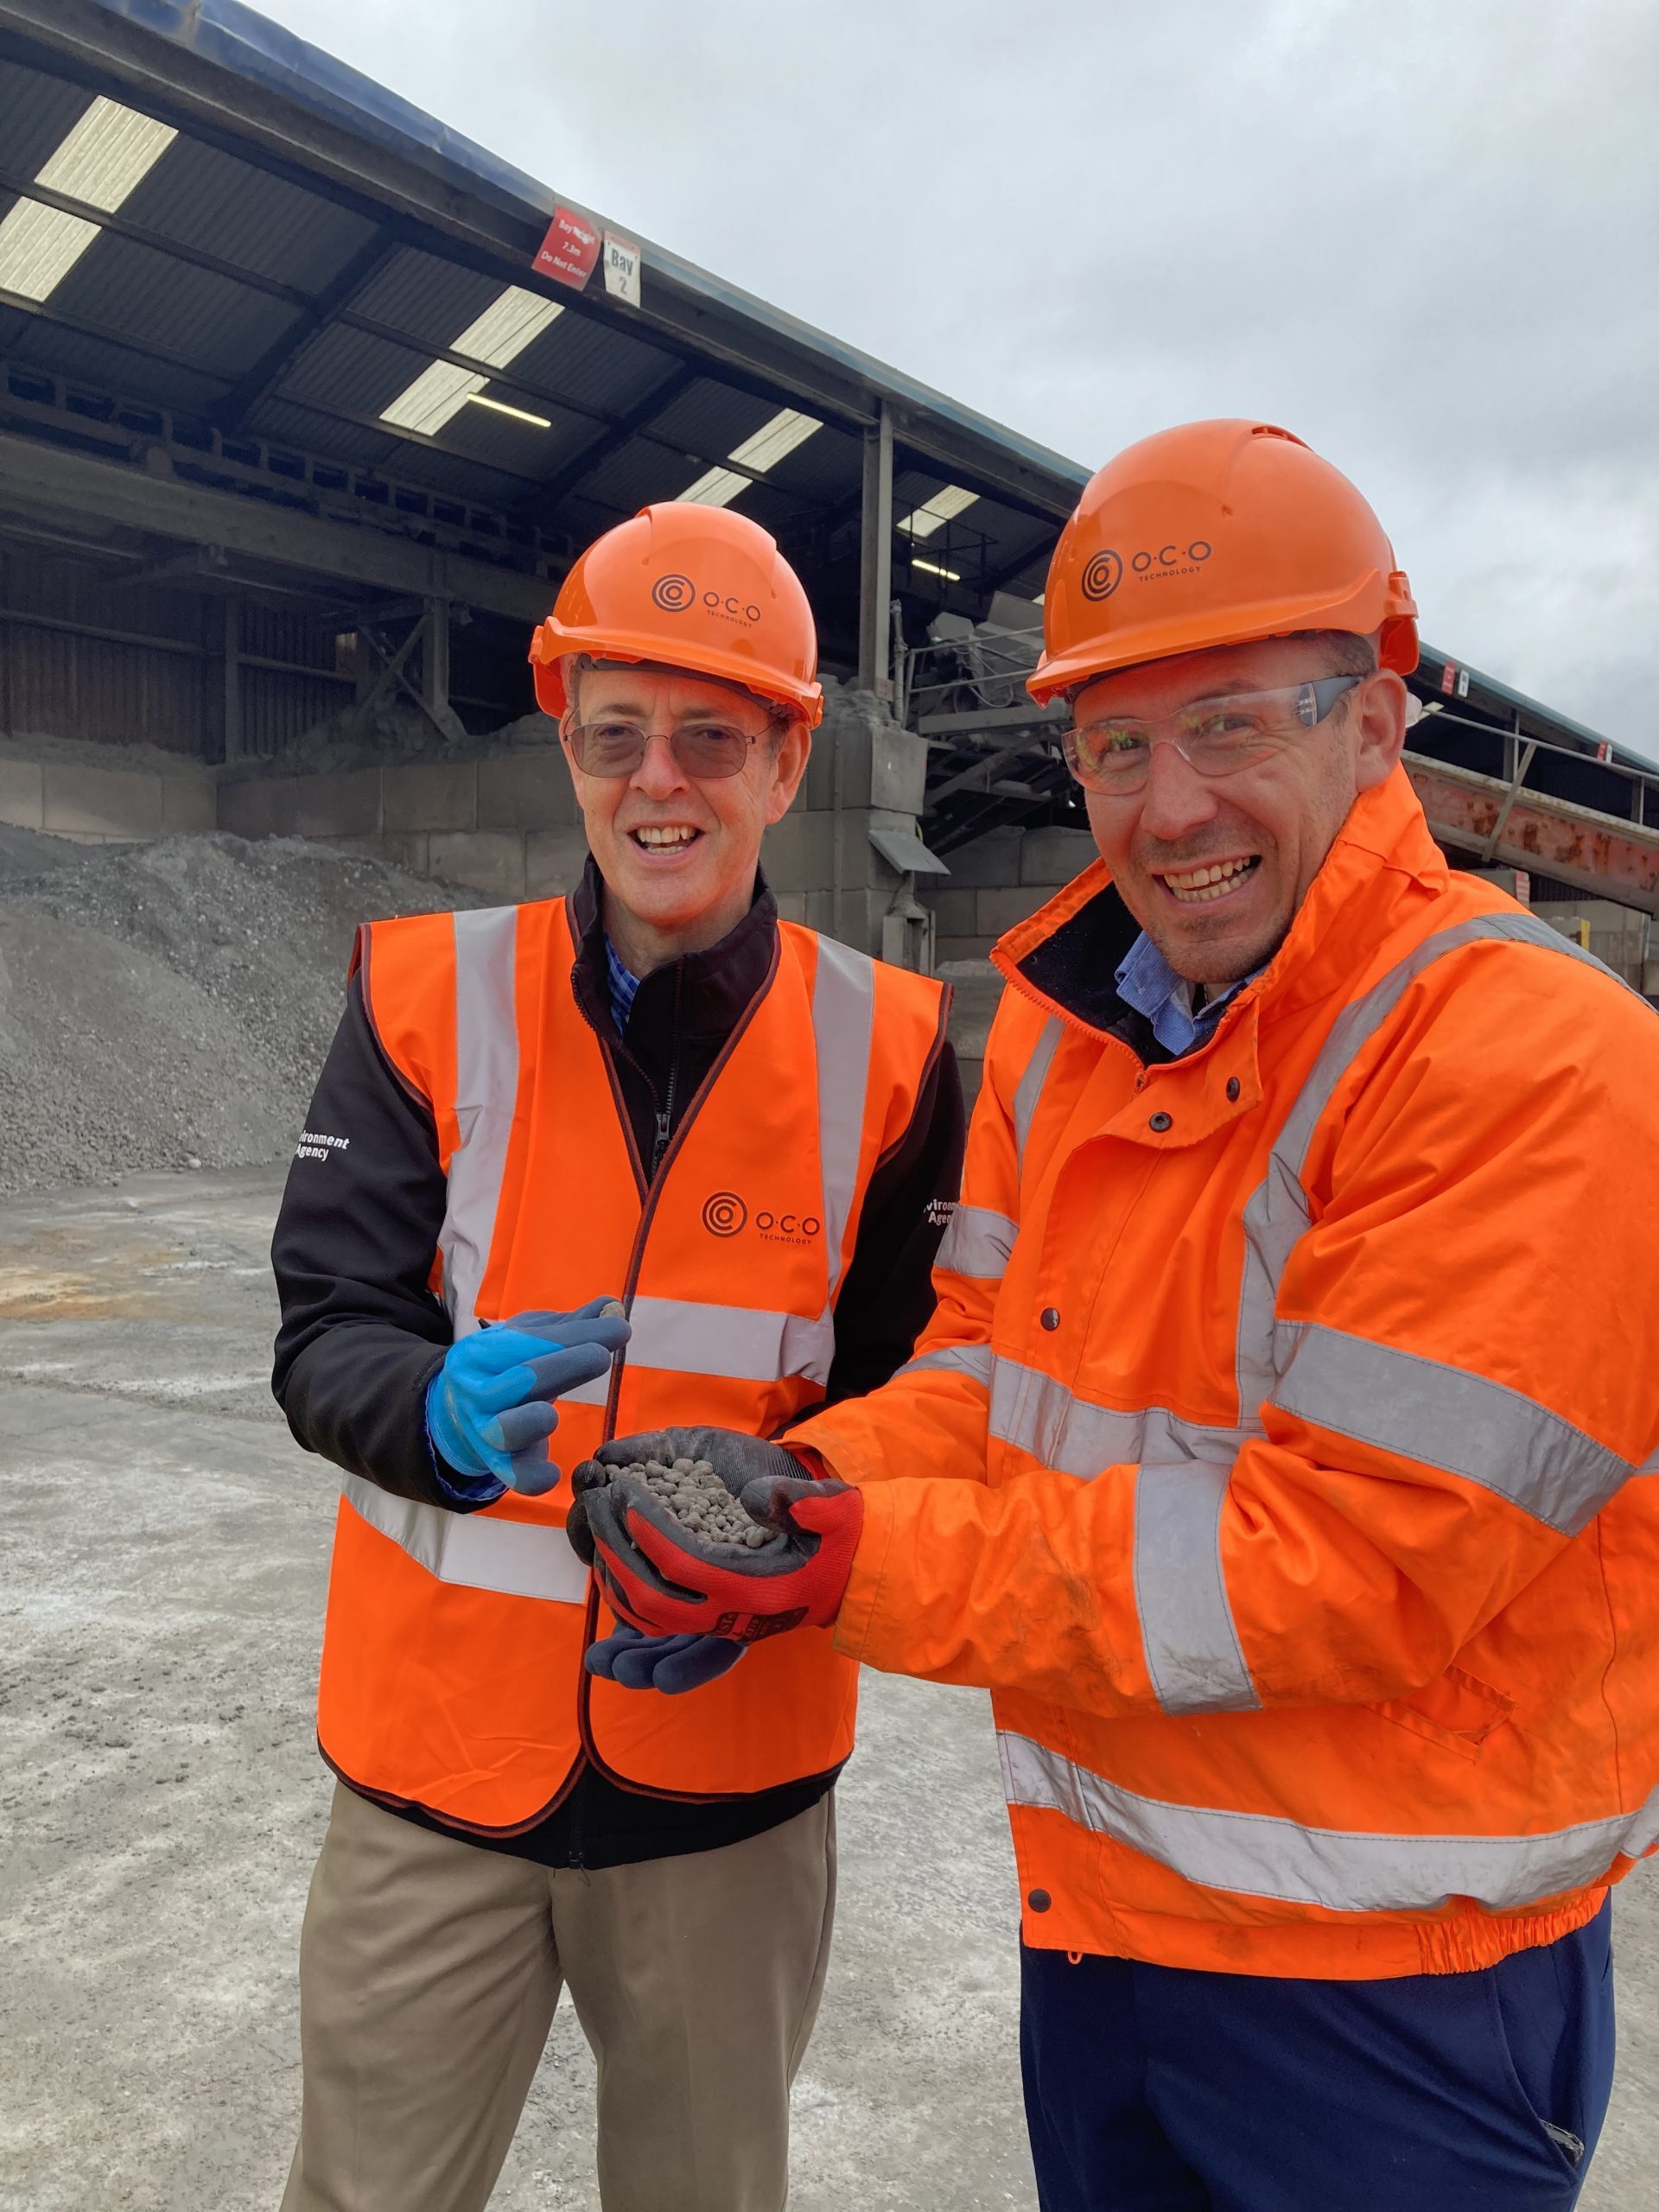 Pictured left is Sir James Bevan, CEO of the Environment Agency, taking a closer look at O.C.O Technology’s world-leading carbon negative aggregate. Alongside him is O.C.O’s Lee Thompson, Health, Safety, Environment and Quality (HSEQ) Manager.